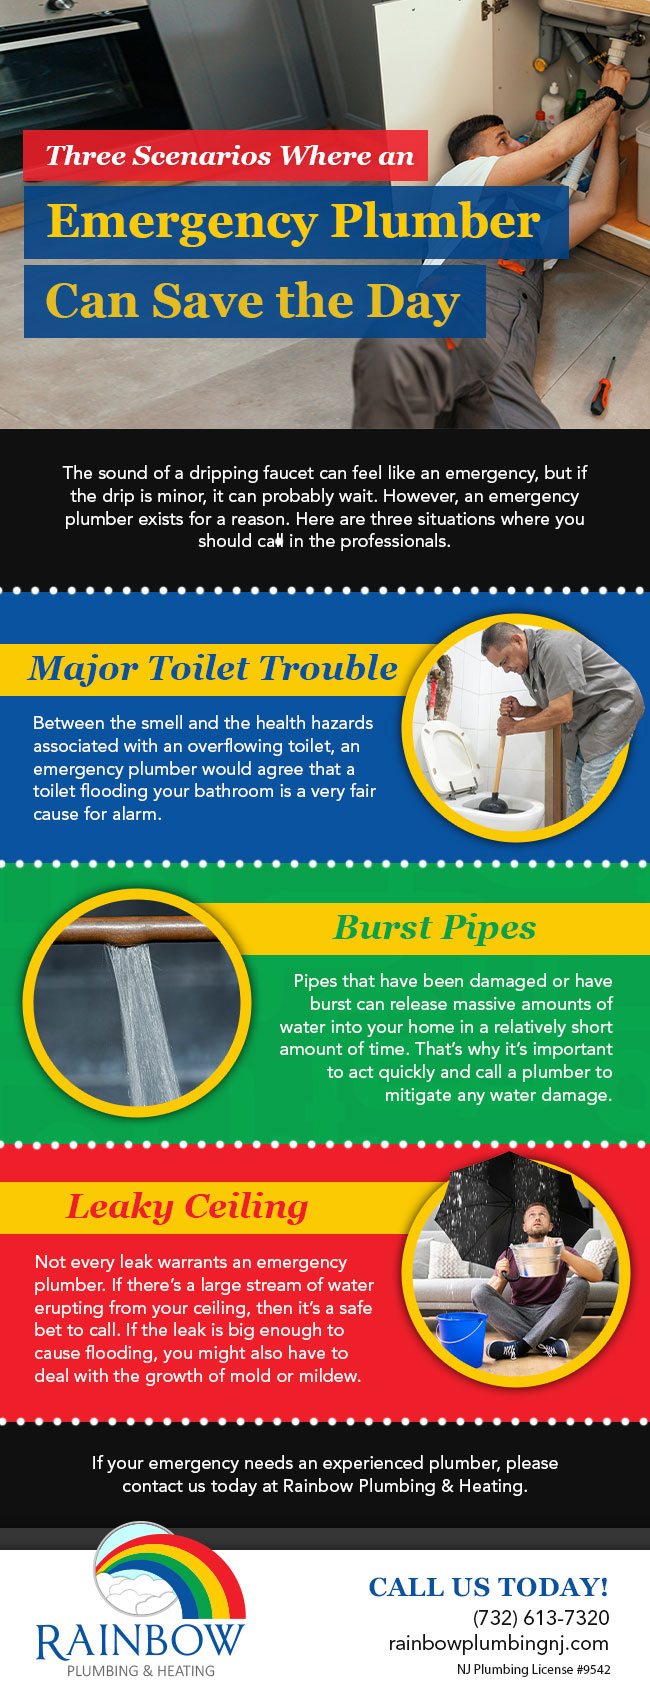 Three Scenarios Where an Emergency Plumber Can Save the Day